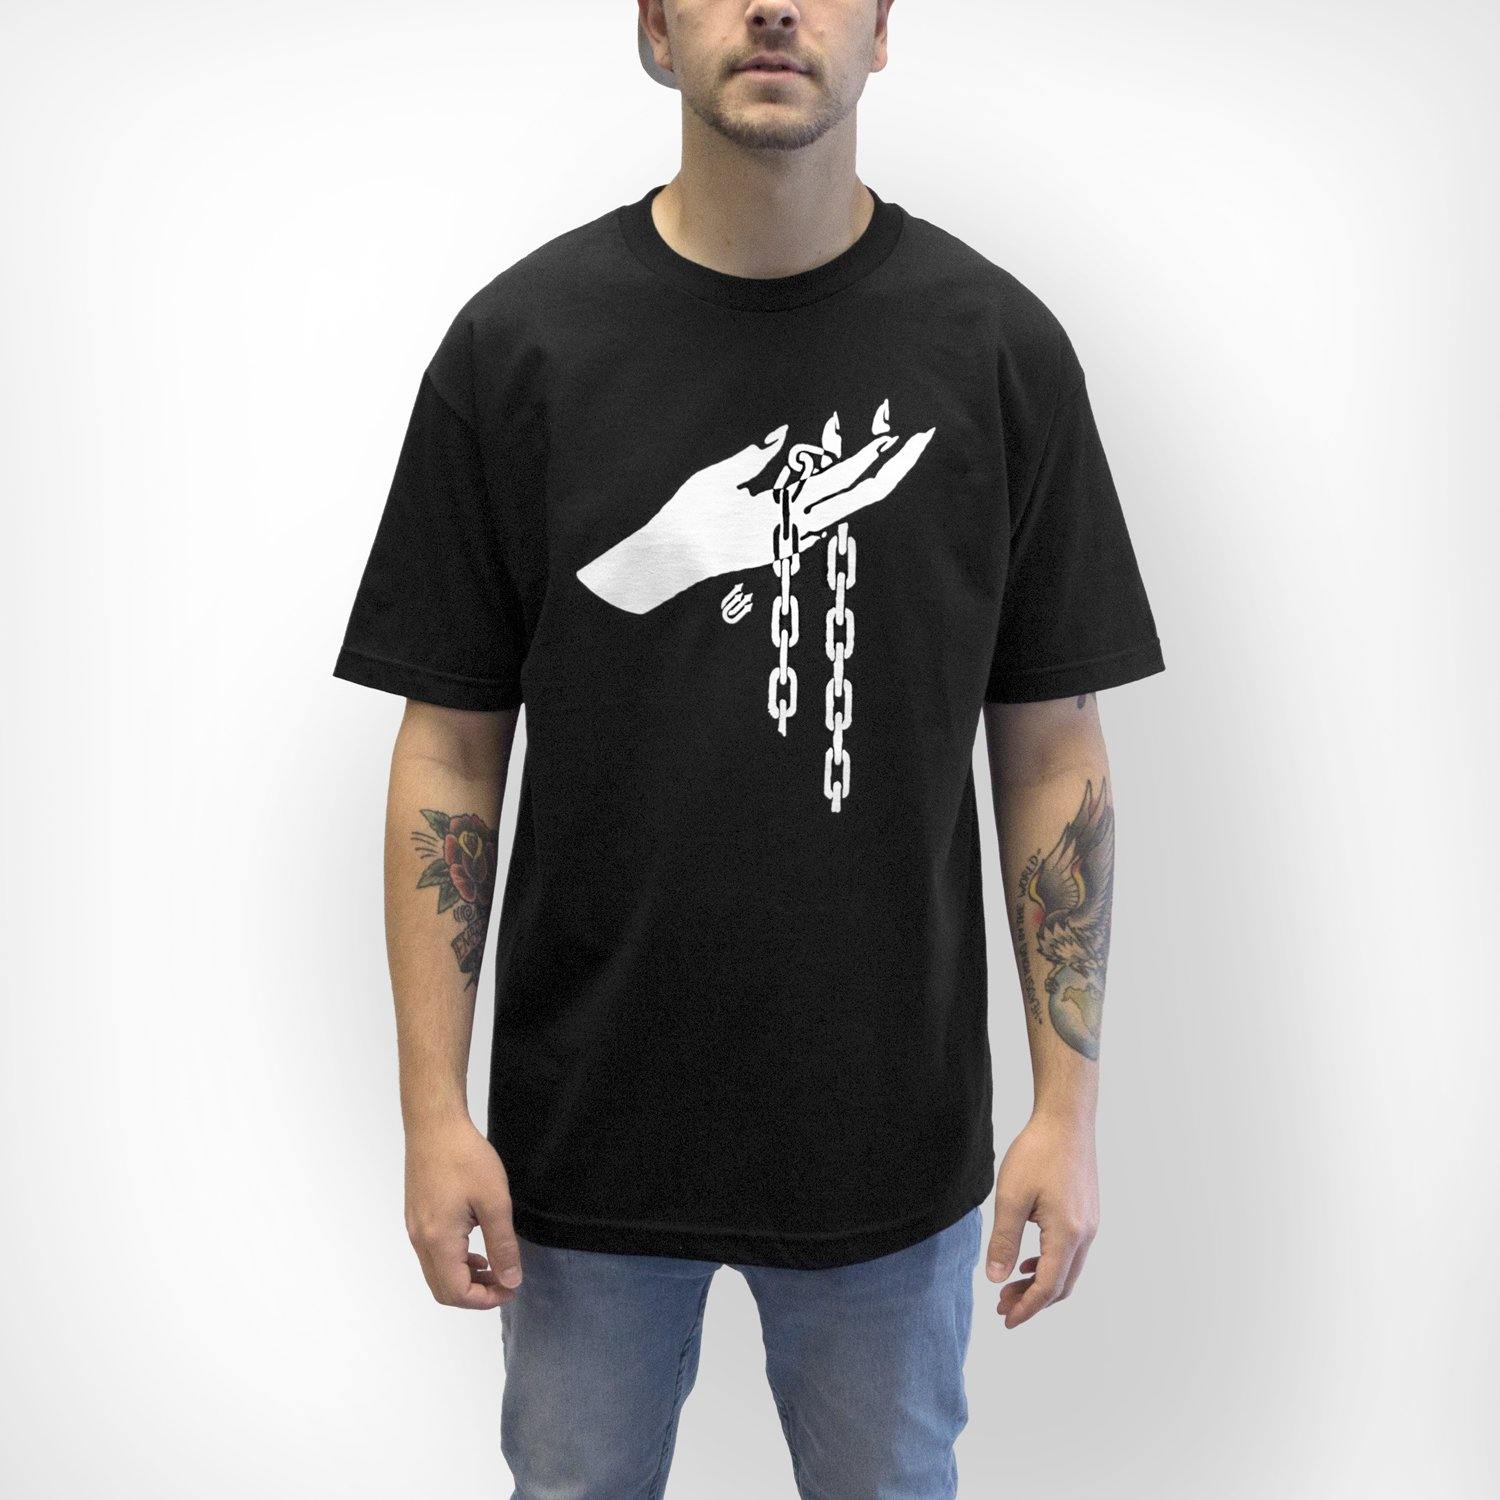 Buy – Cold Cuts Limited "Chain" Shirt – Band & Music Merch – Cold Cuts Merch